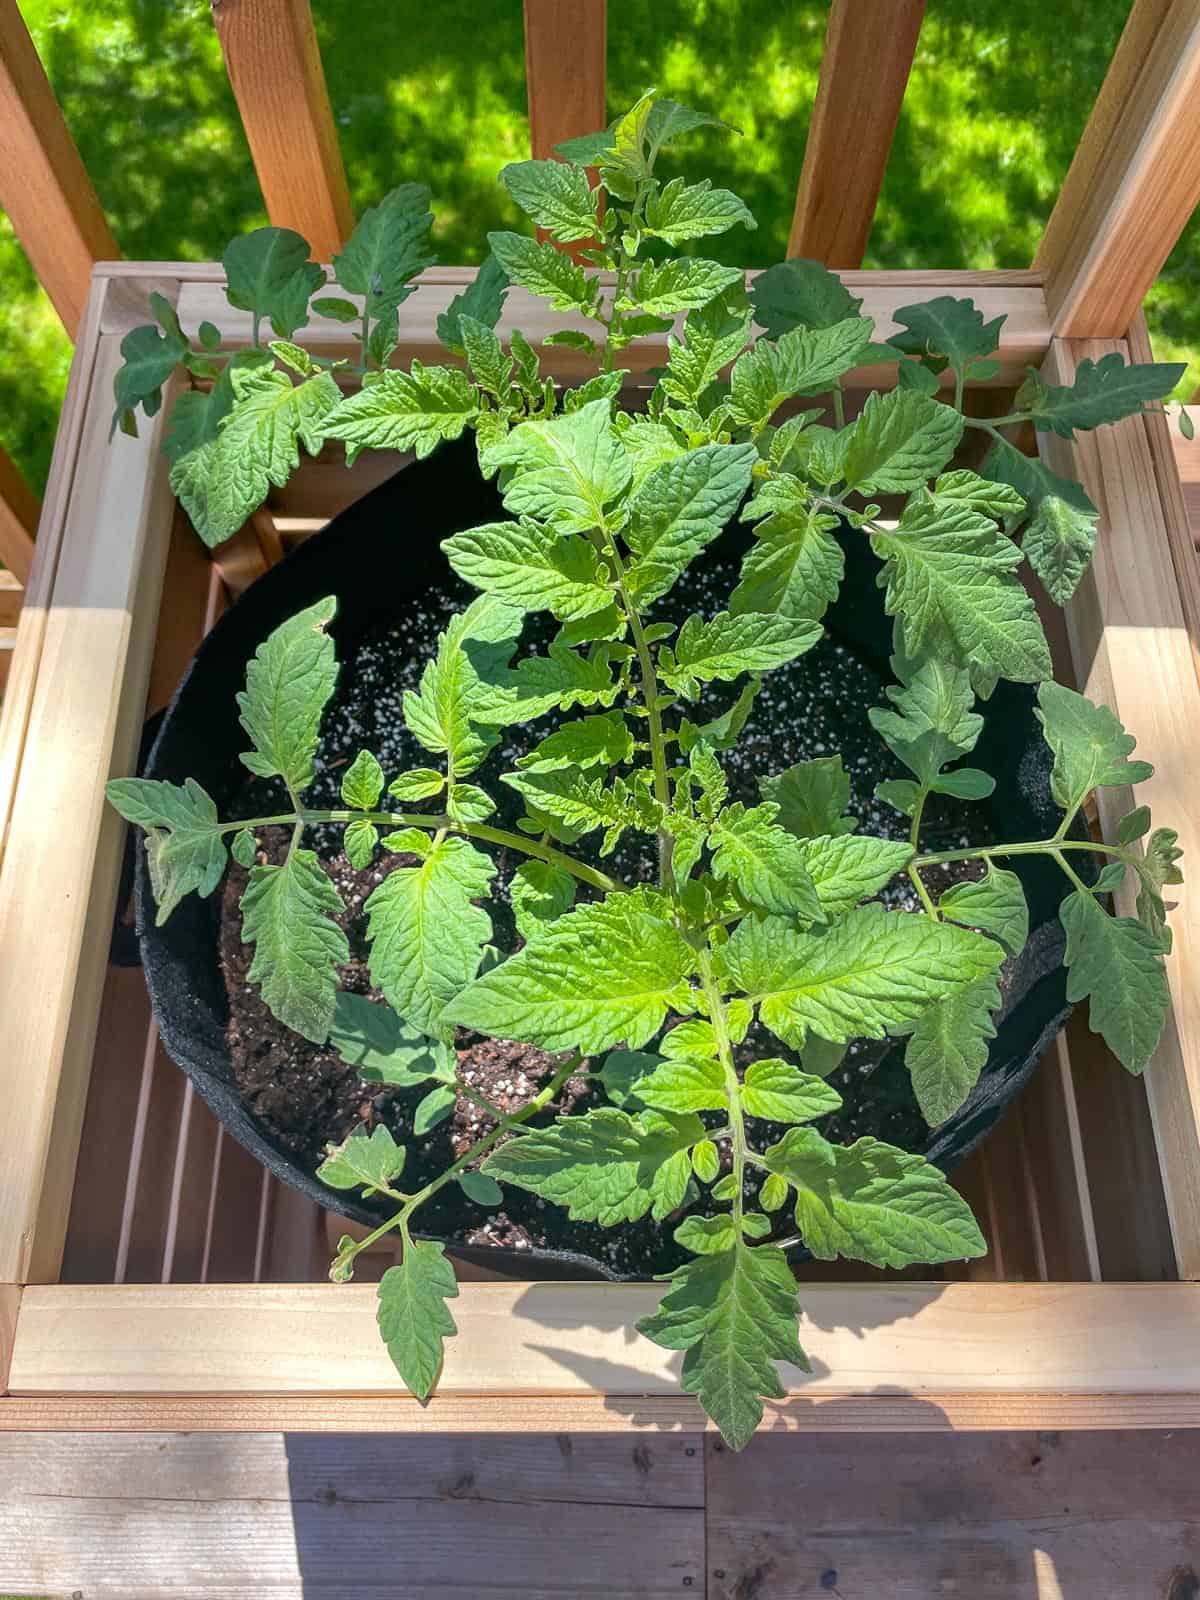 tomato plant in a grow bag in a planter box